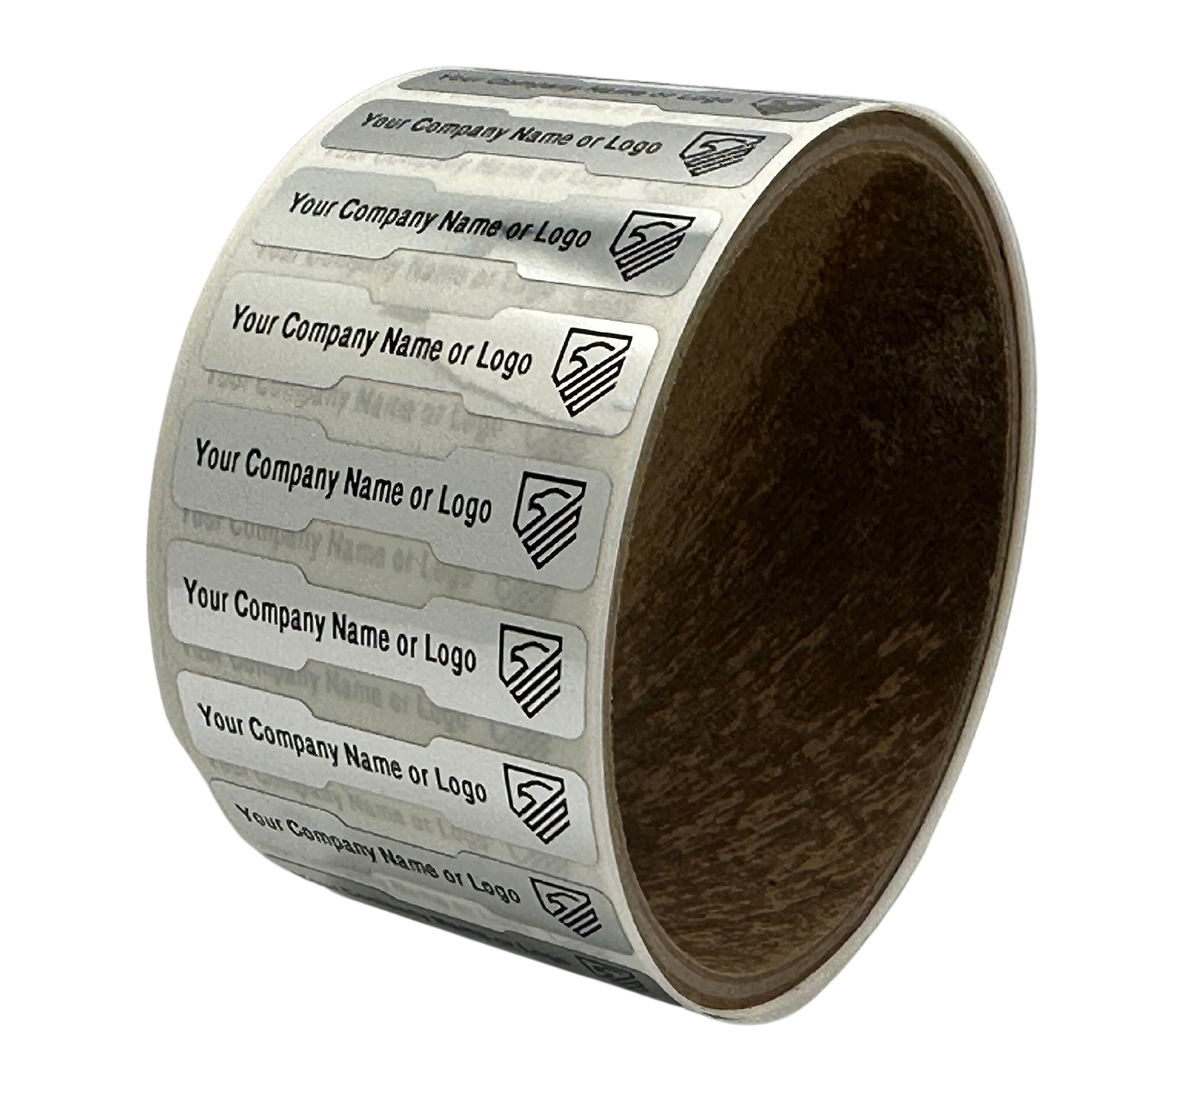 500 Tamper Evident Security Labels Silver Chrome TamperVoidPro Seal Sticker, Dogbone Shape Size 1.75" x 0.375 (44mm x 9mm). Custom Printed. >Click on item details to customize.